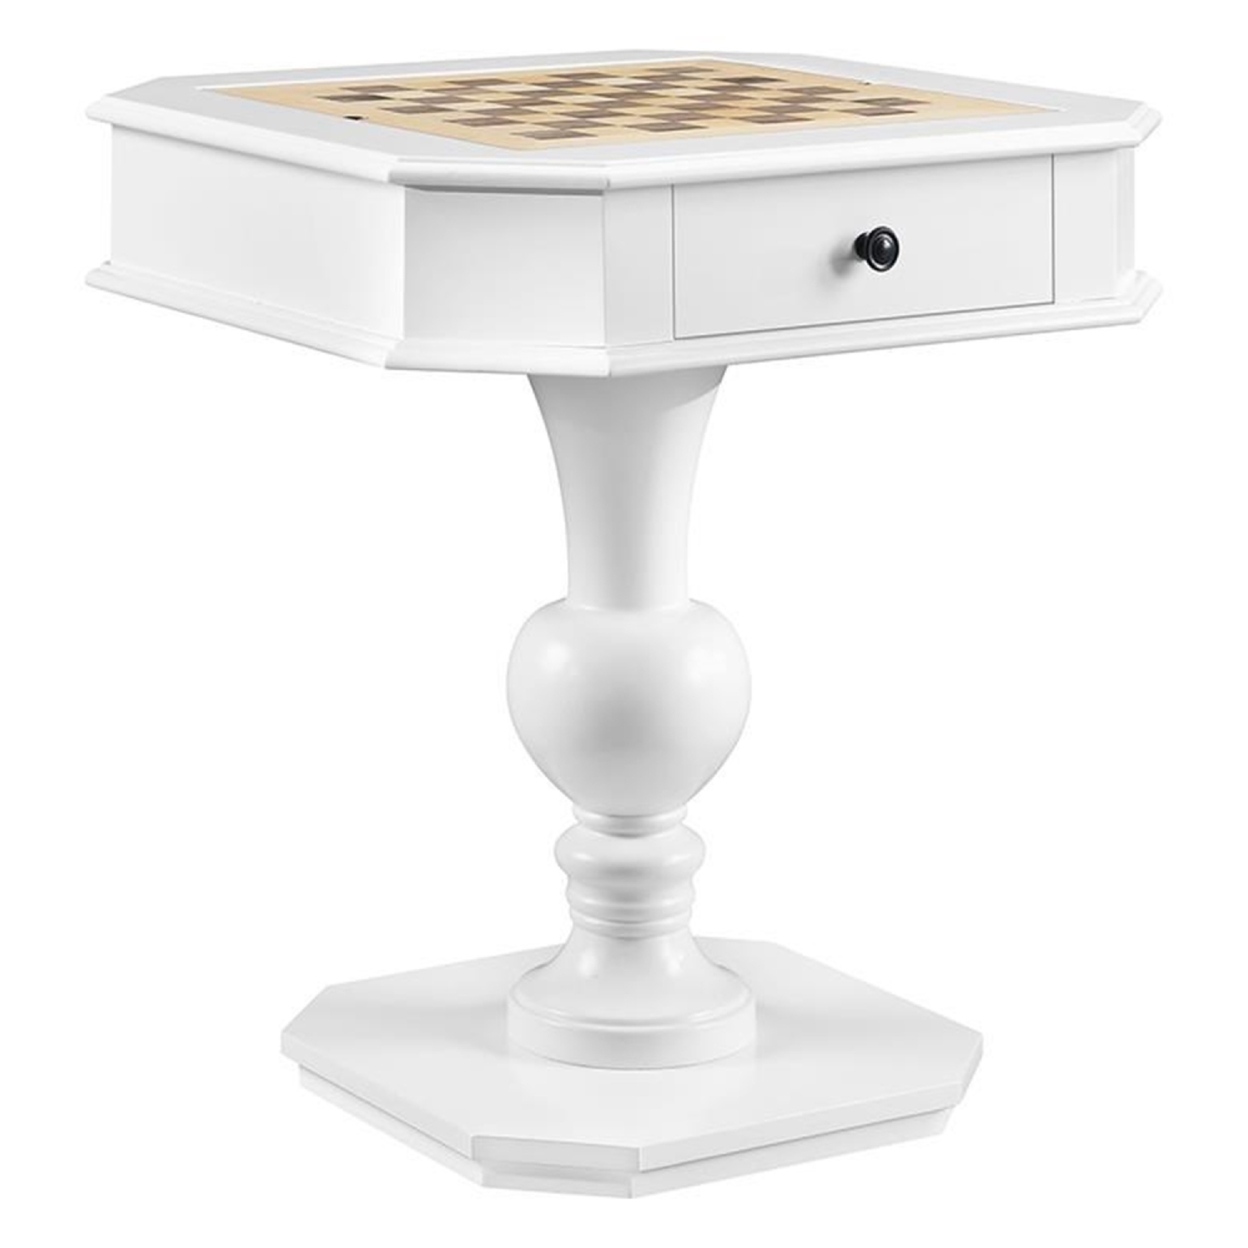 Susy 28 Inch Wood Reversible Board Game Table With Pedestal Stand, White- Saltoro Sherpi